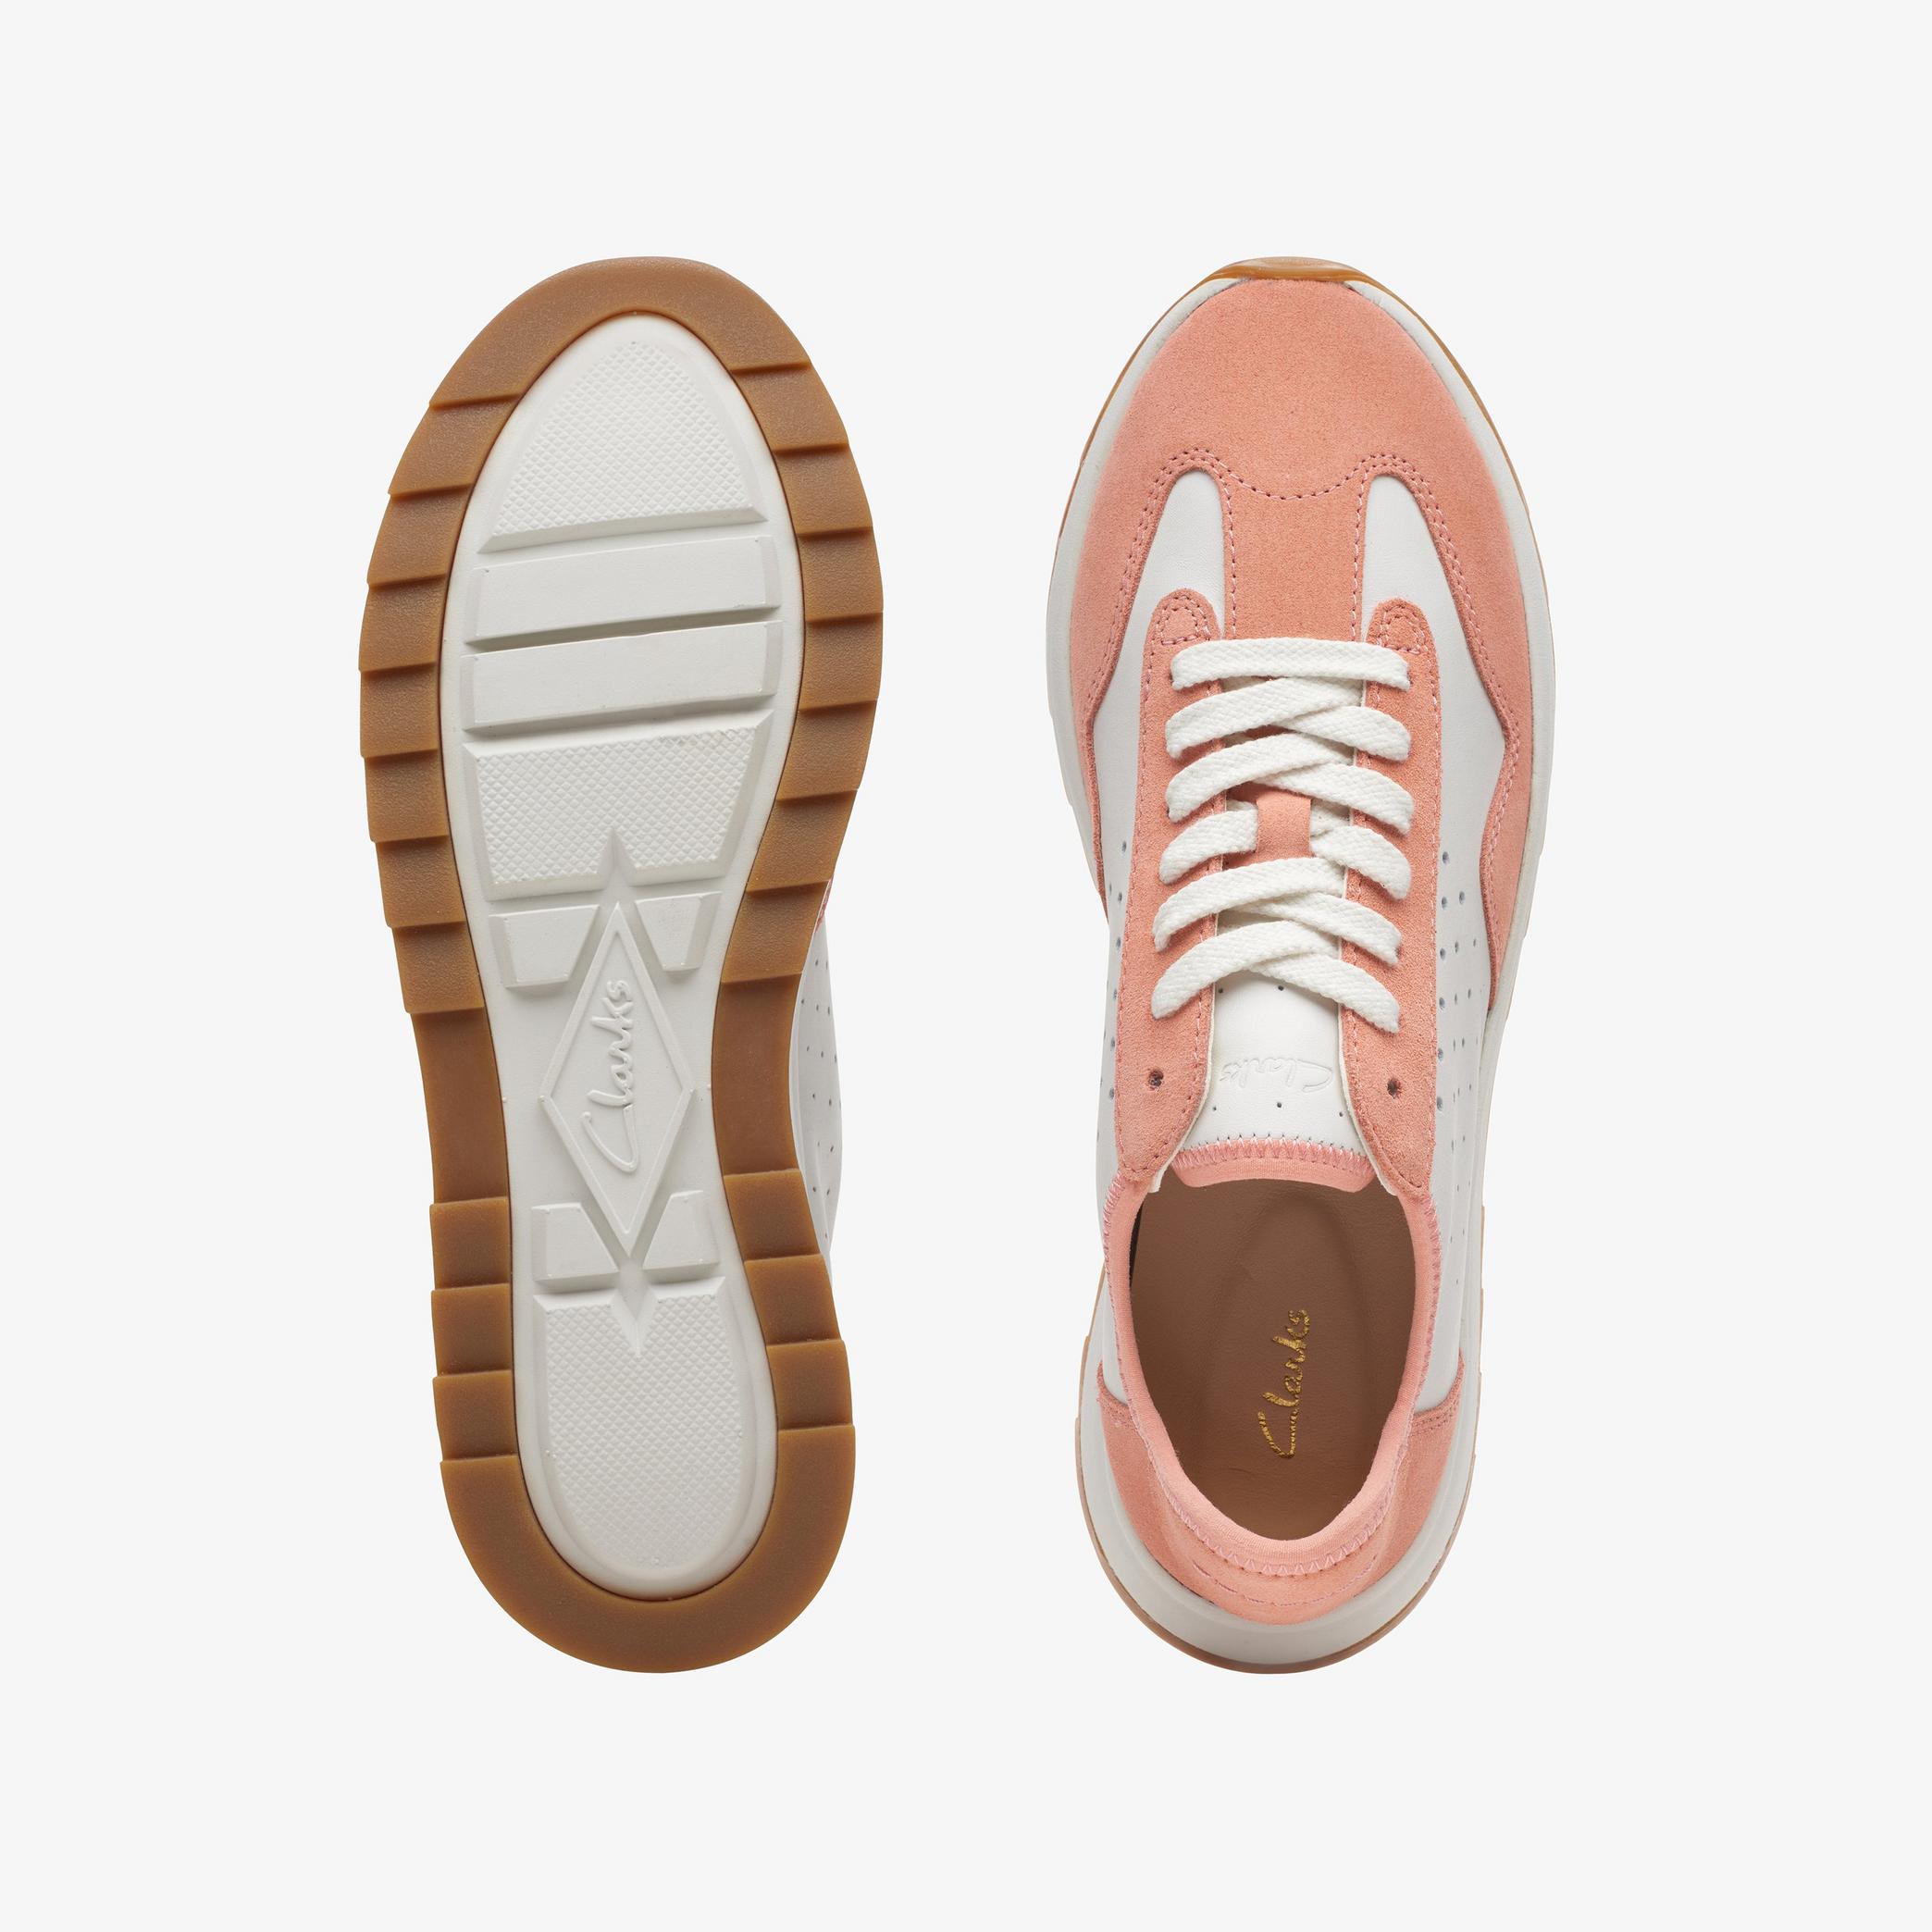 WOMENS DashLite Lace Coral/White Trainers | Clarks Outlet